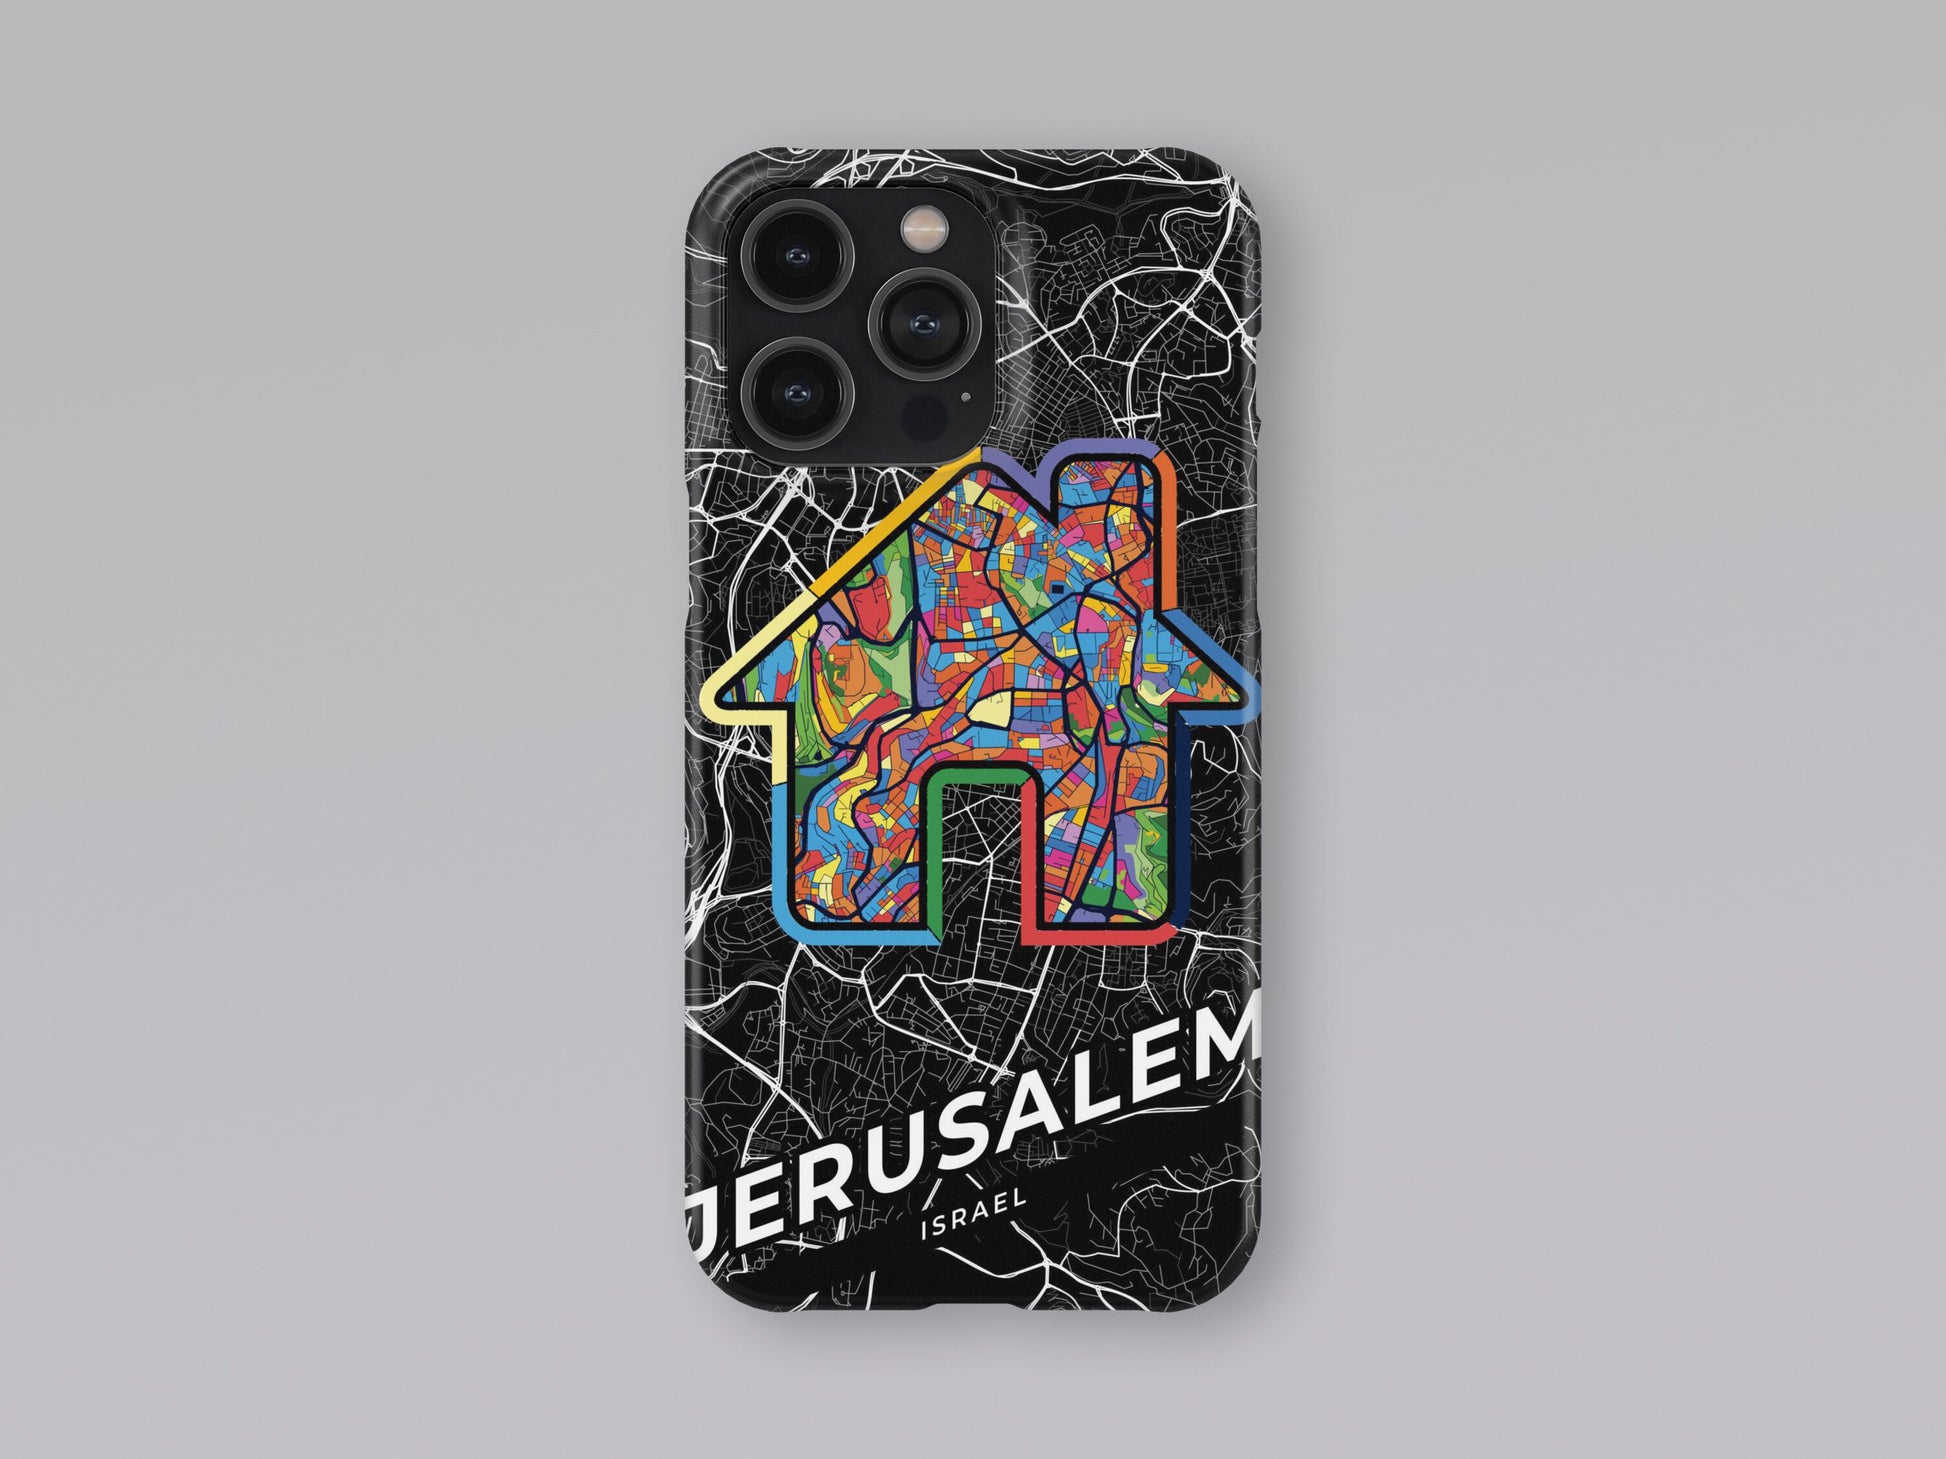 Jerusalem Israel slim phone case with colorful icon. Birthday, wedding or housewarming gift. Couple match cases. 3